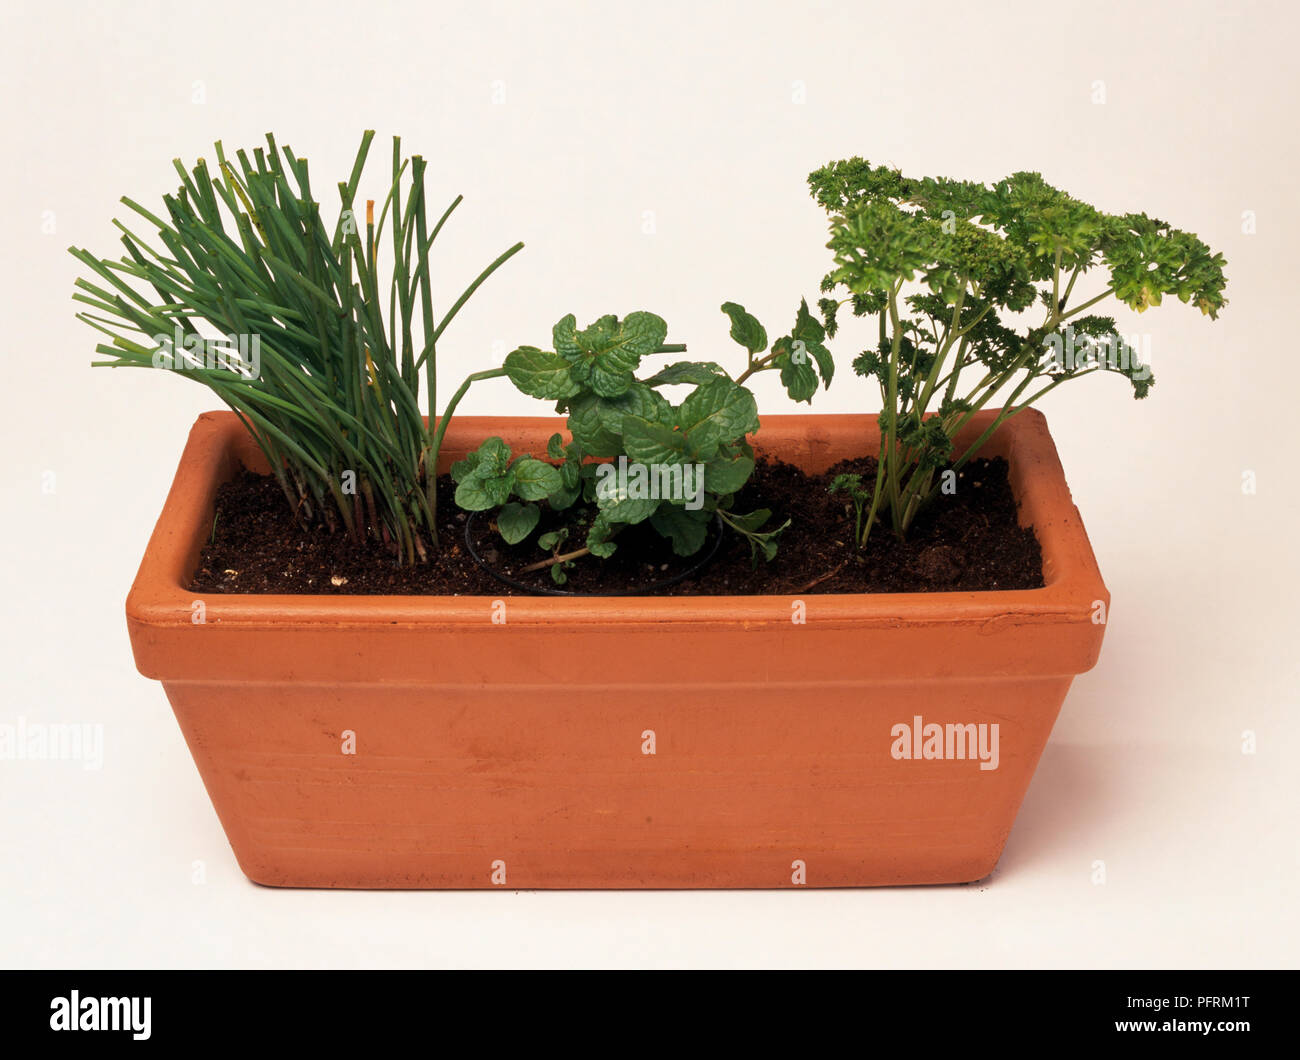 Chives, mint, and parsley growing in terracotta window box Stock Photo